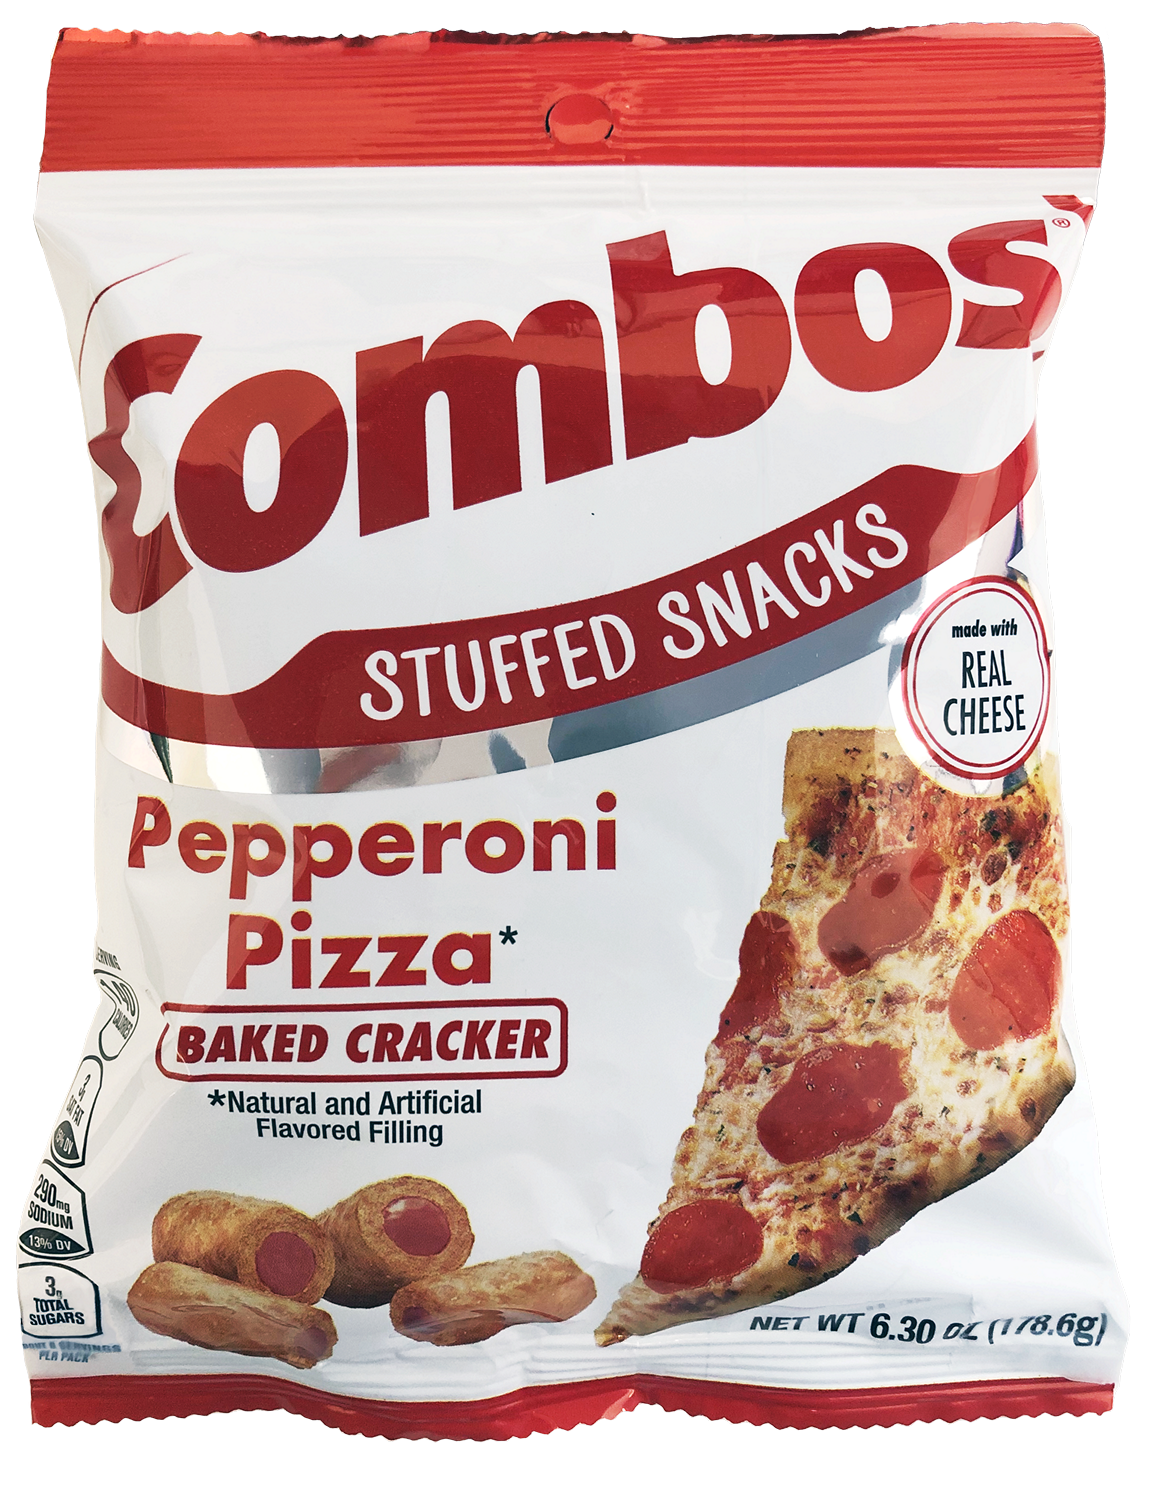 https://exclusivebrands.ca/wp-content/uploads/2021/11/prod-salty-CombosFamily-Pk-Pepperoni.png